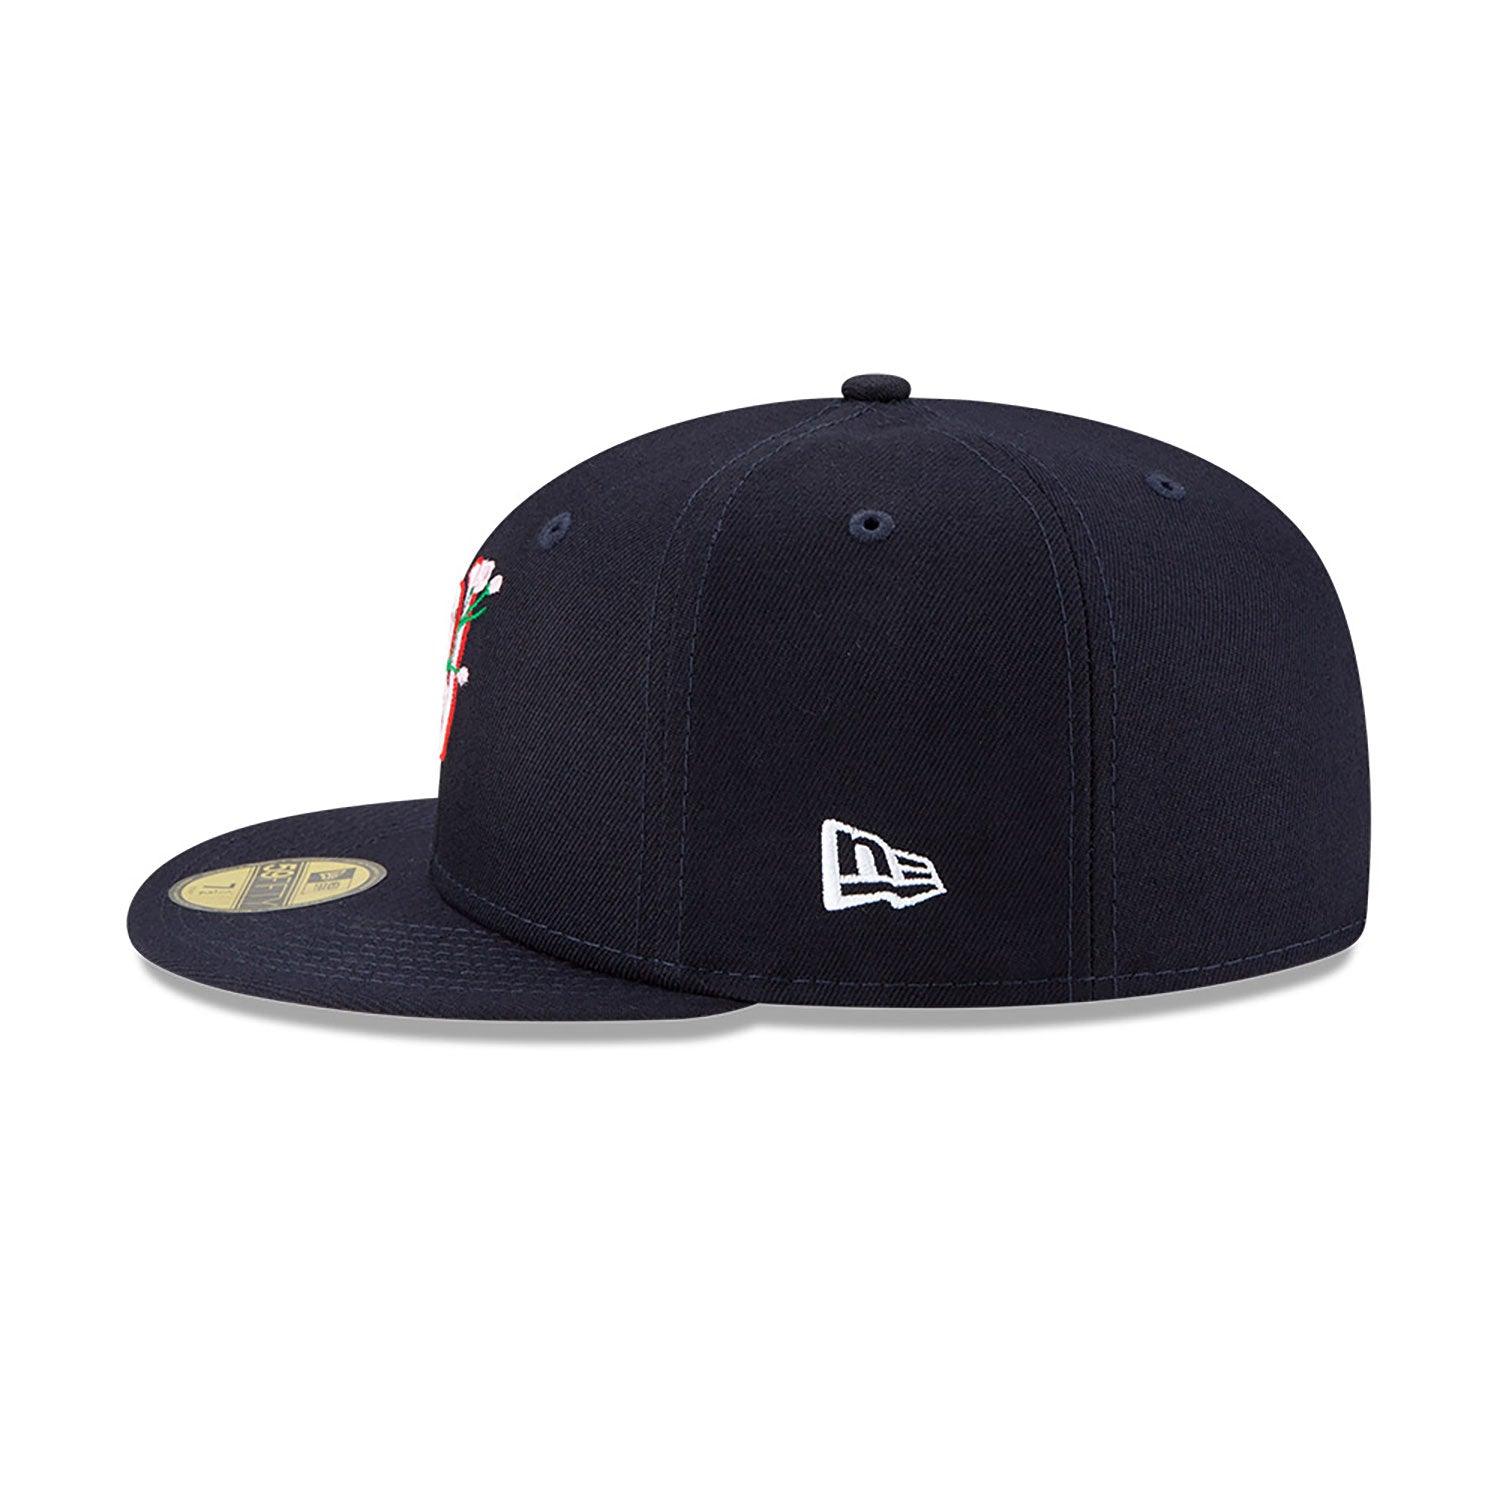 NEW ERA 59FIFTY MLB WASHINGTON NATIONALS SIDE PATCH BLOOM NAVY / PINK UV FITTED CAP - FAM